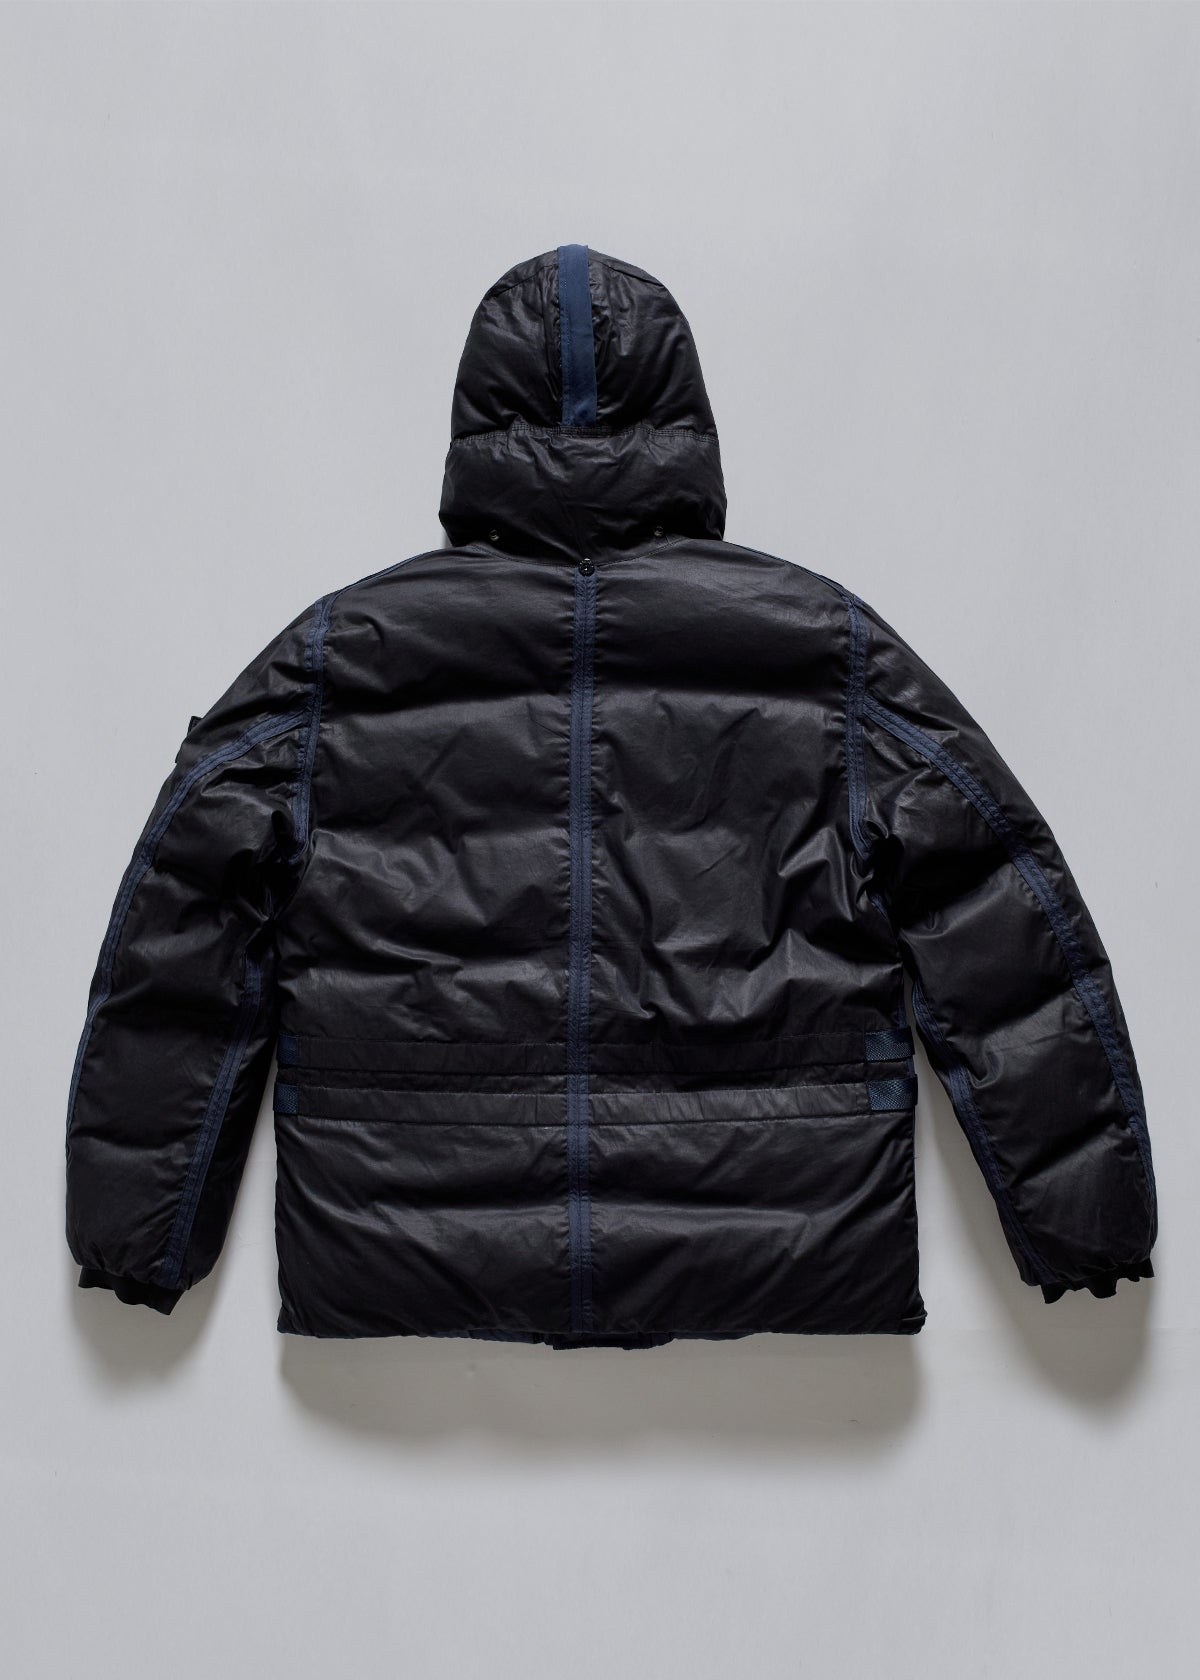 Reversible Goose Down Jacket Navy AW2010 - Large - The Archivist Store